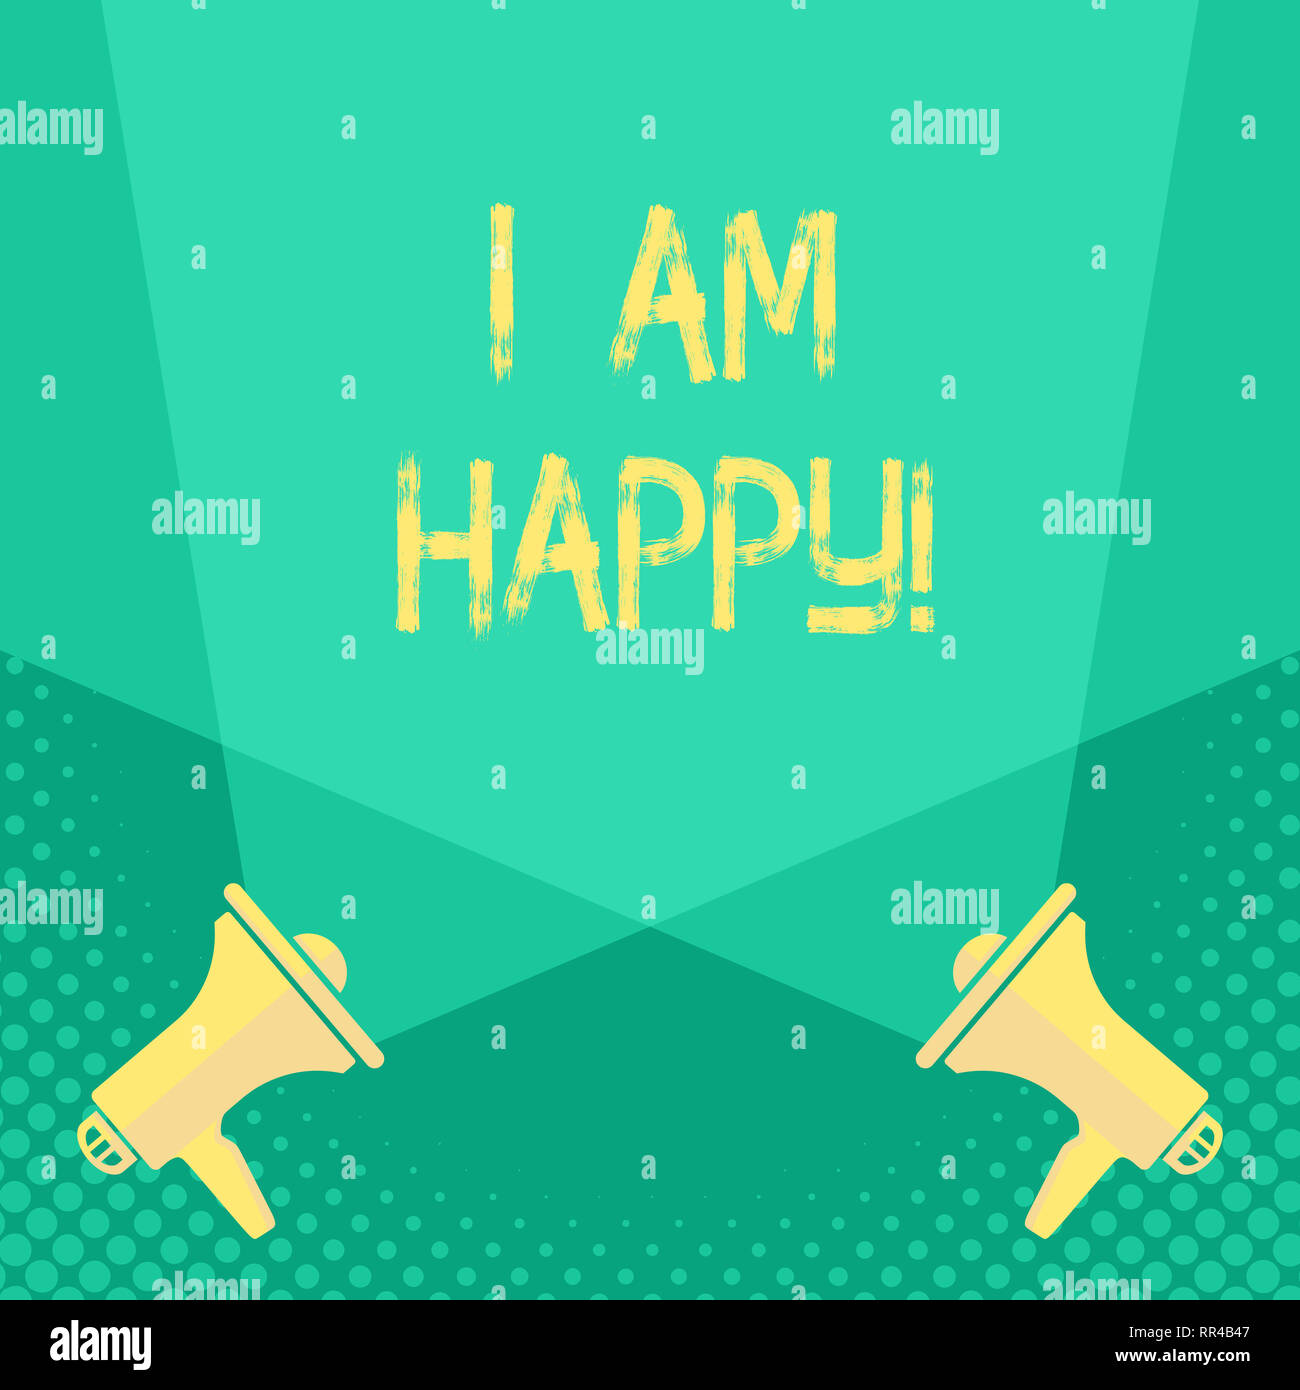 Handwriting Text I Am Happy Concept Meaning To Have A Fulfilled Life Full Of Love Good Job Happiness Stock Photo Alamy